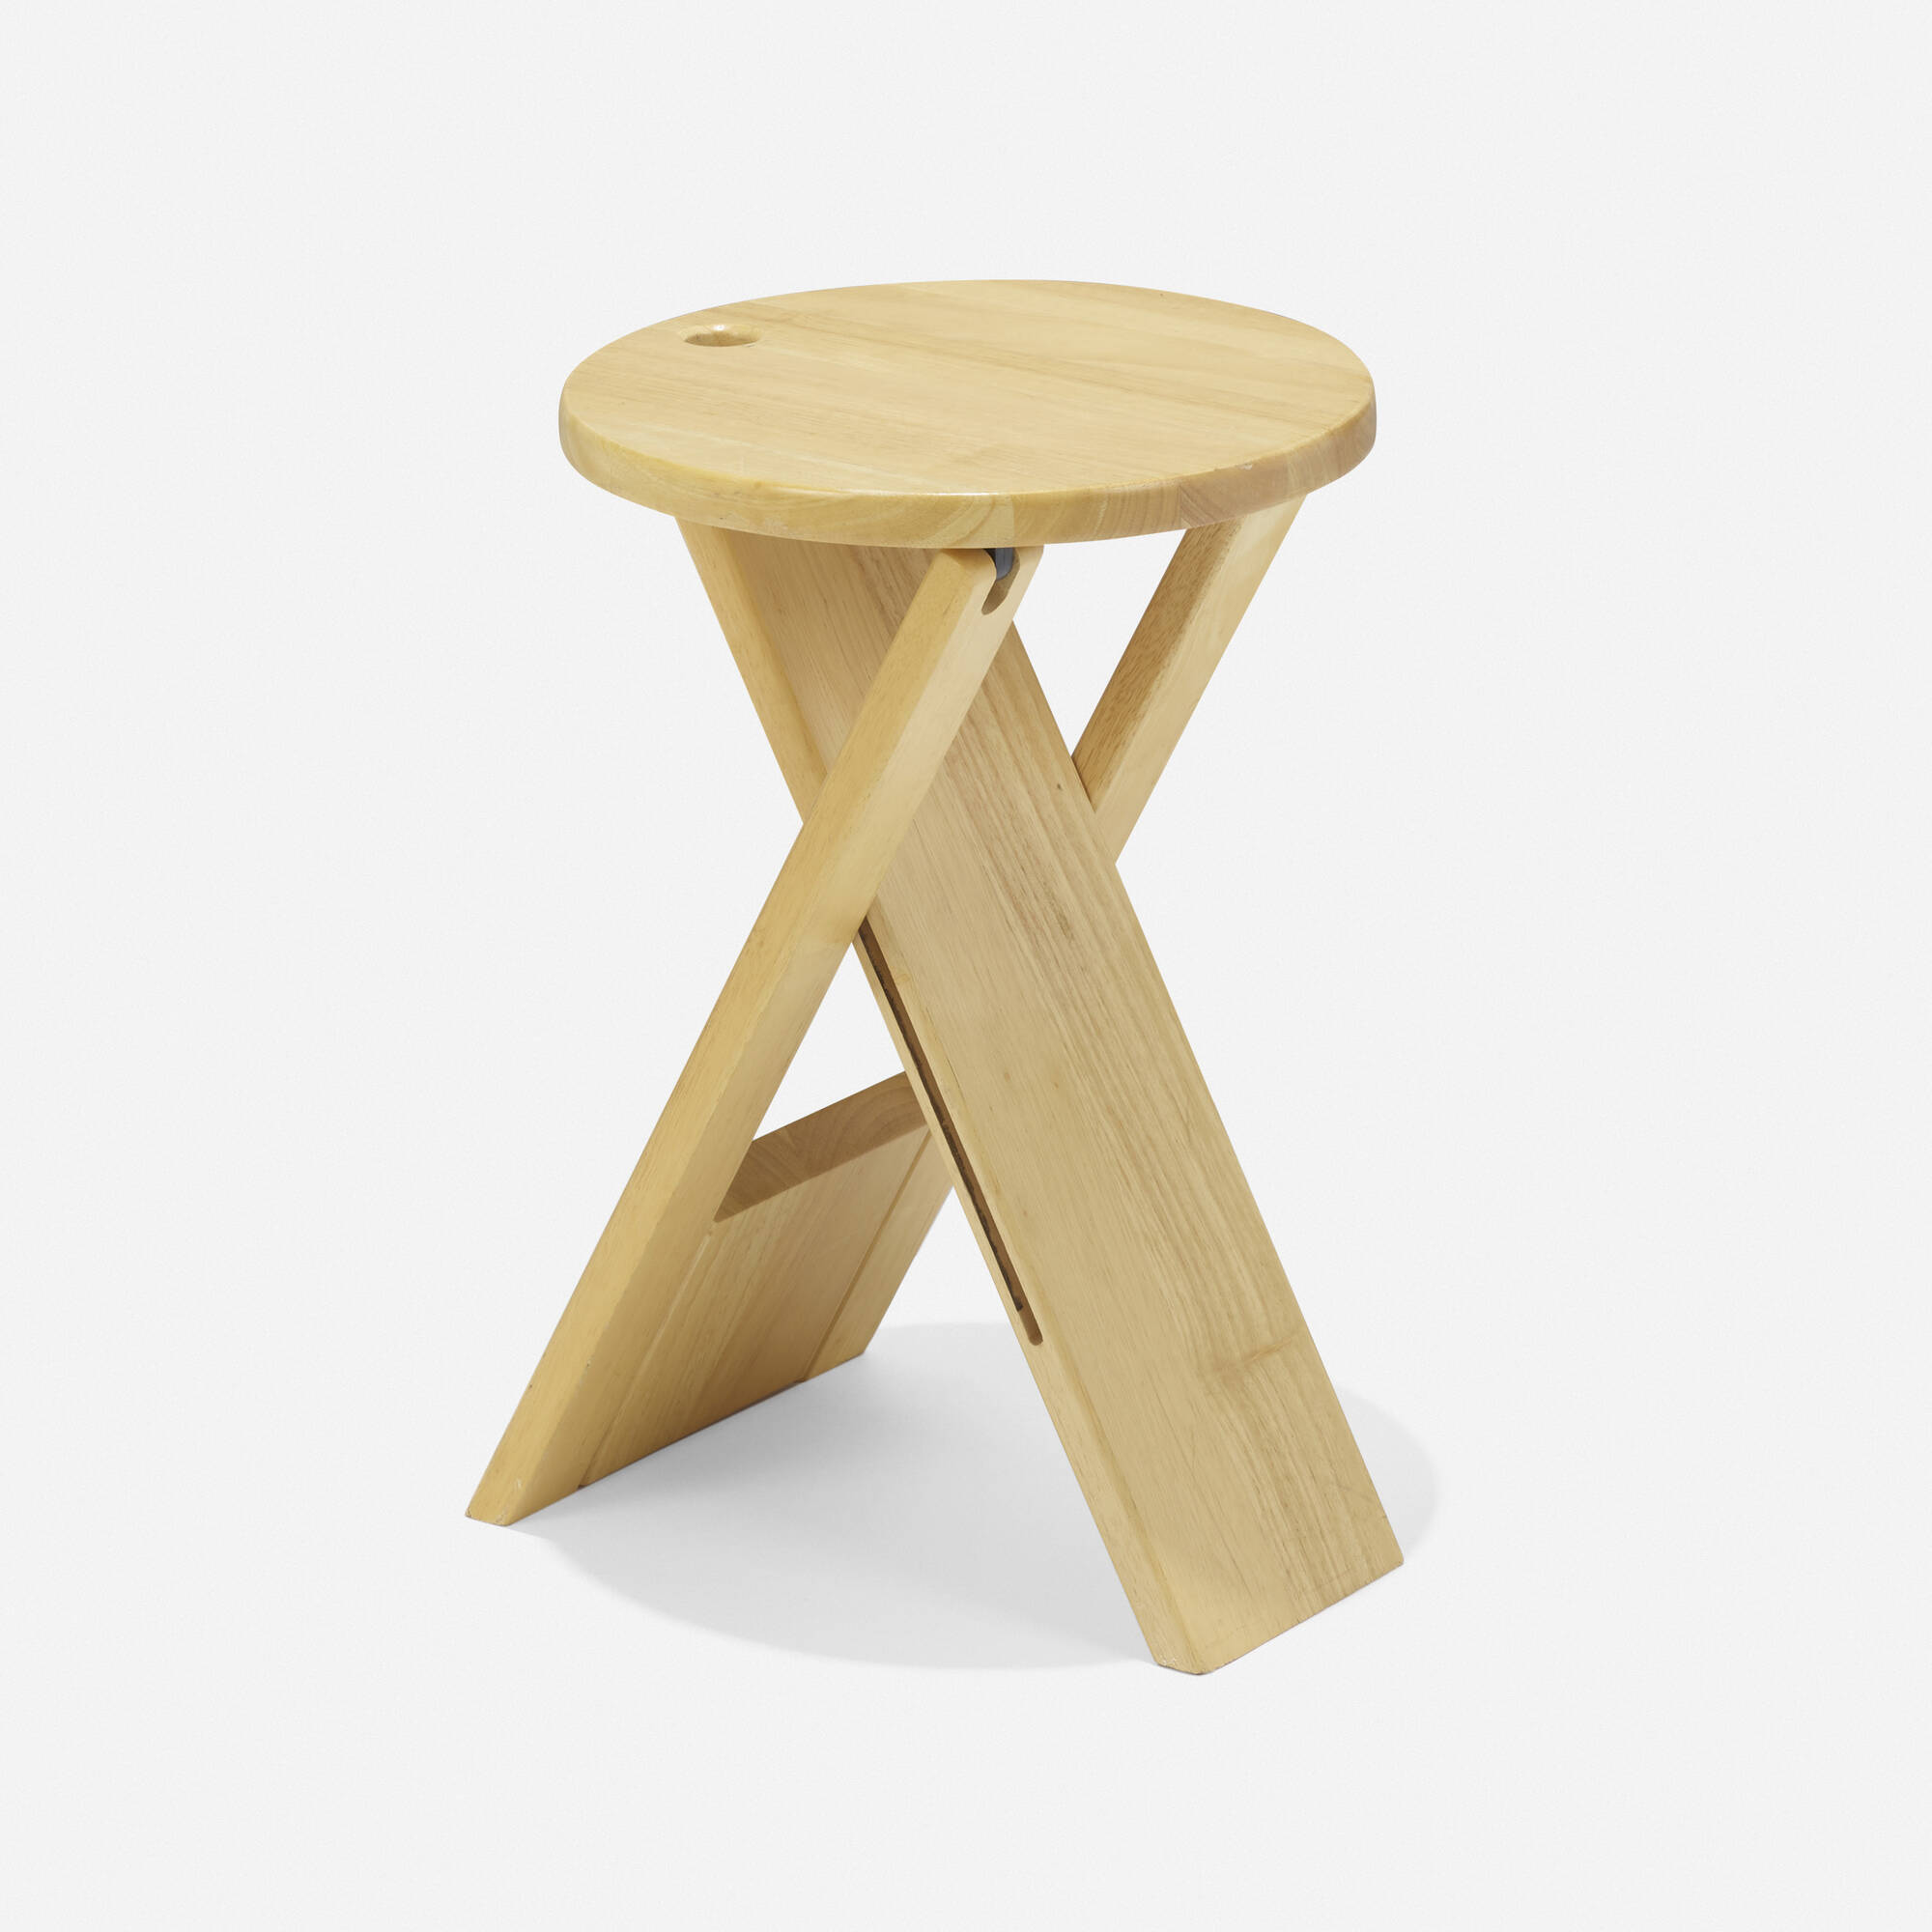 185: ROGER TALLON, TS folding stool < A Seat for One: Historical 